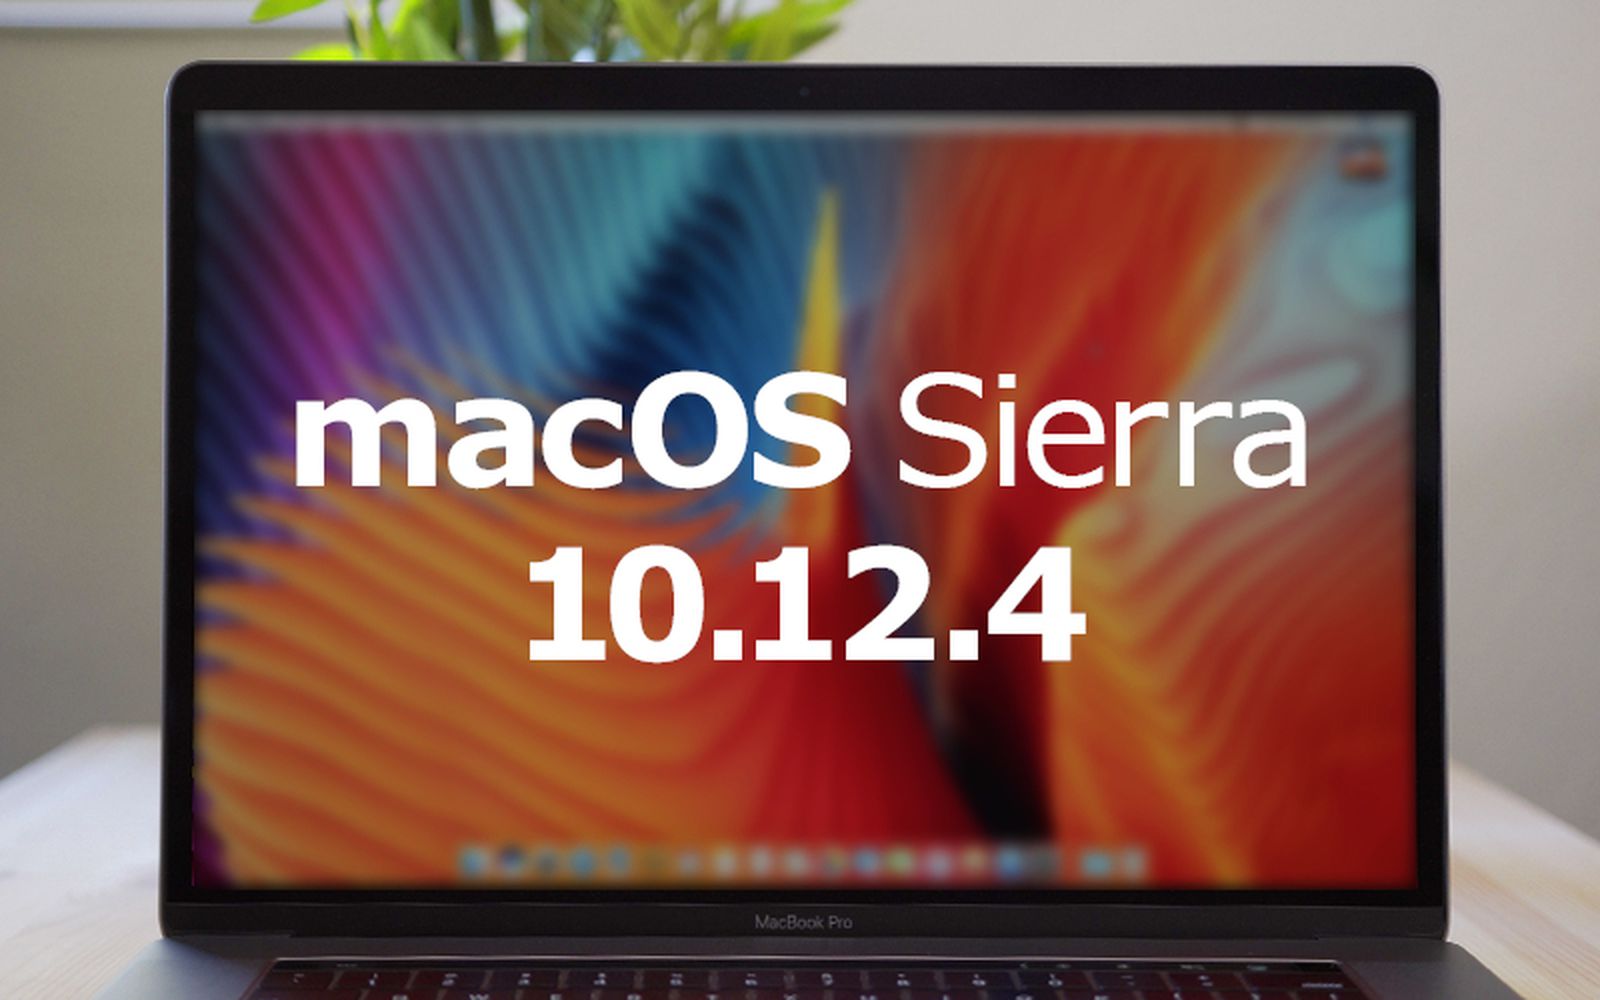 Apple Releases macOS Sierra 10.12.4 With New Night Shift Mode